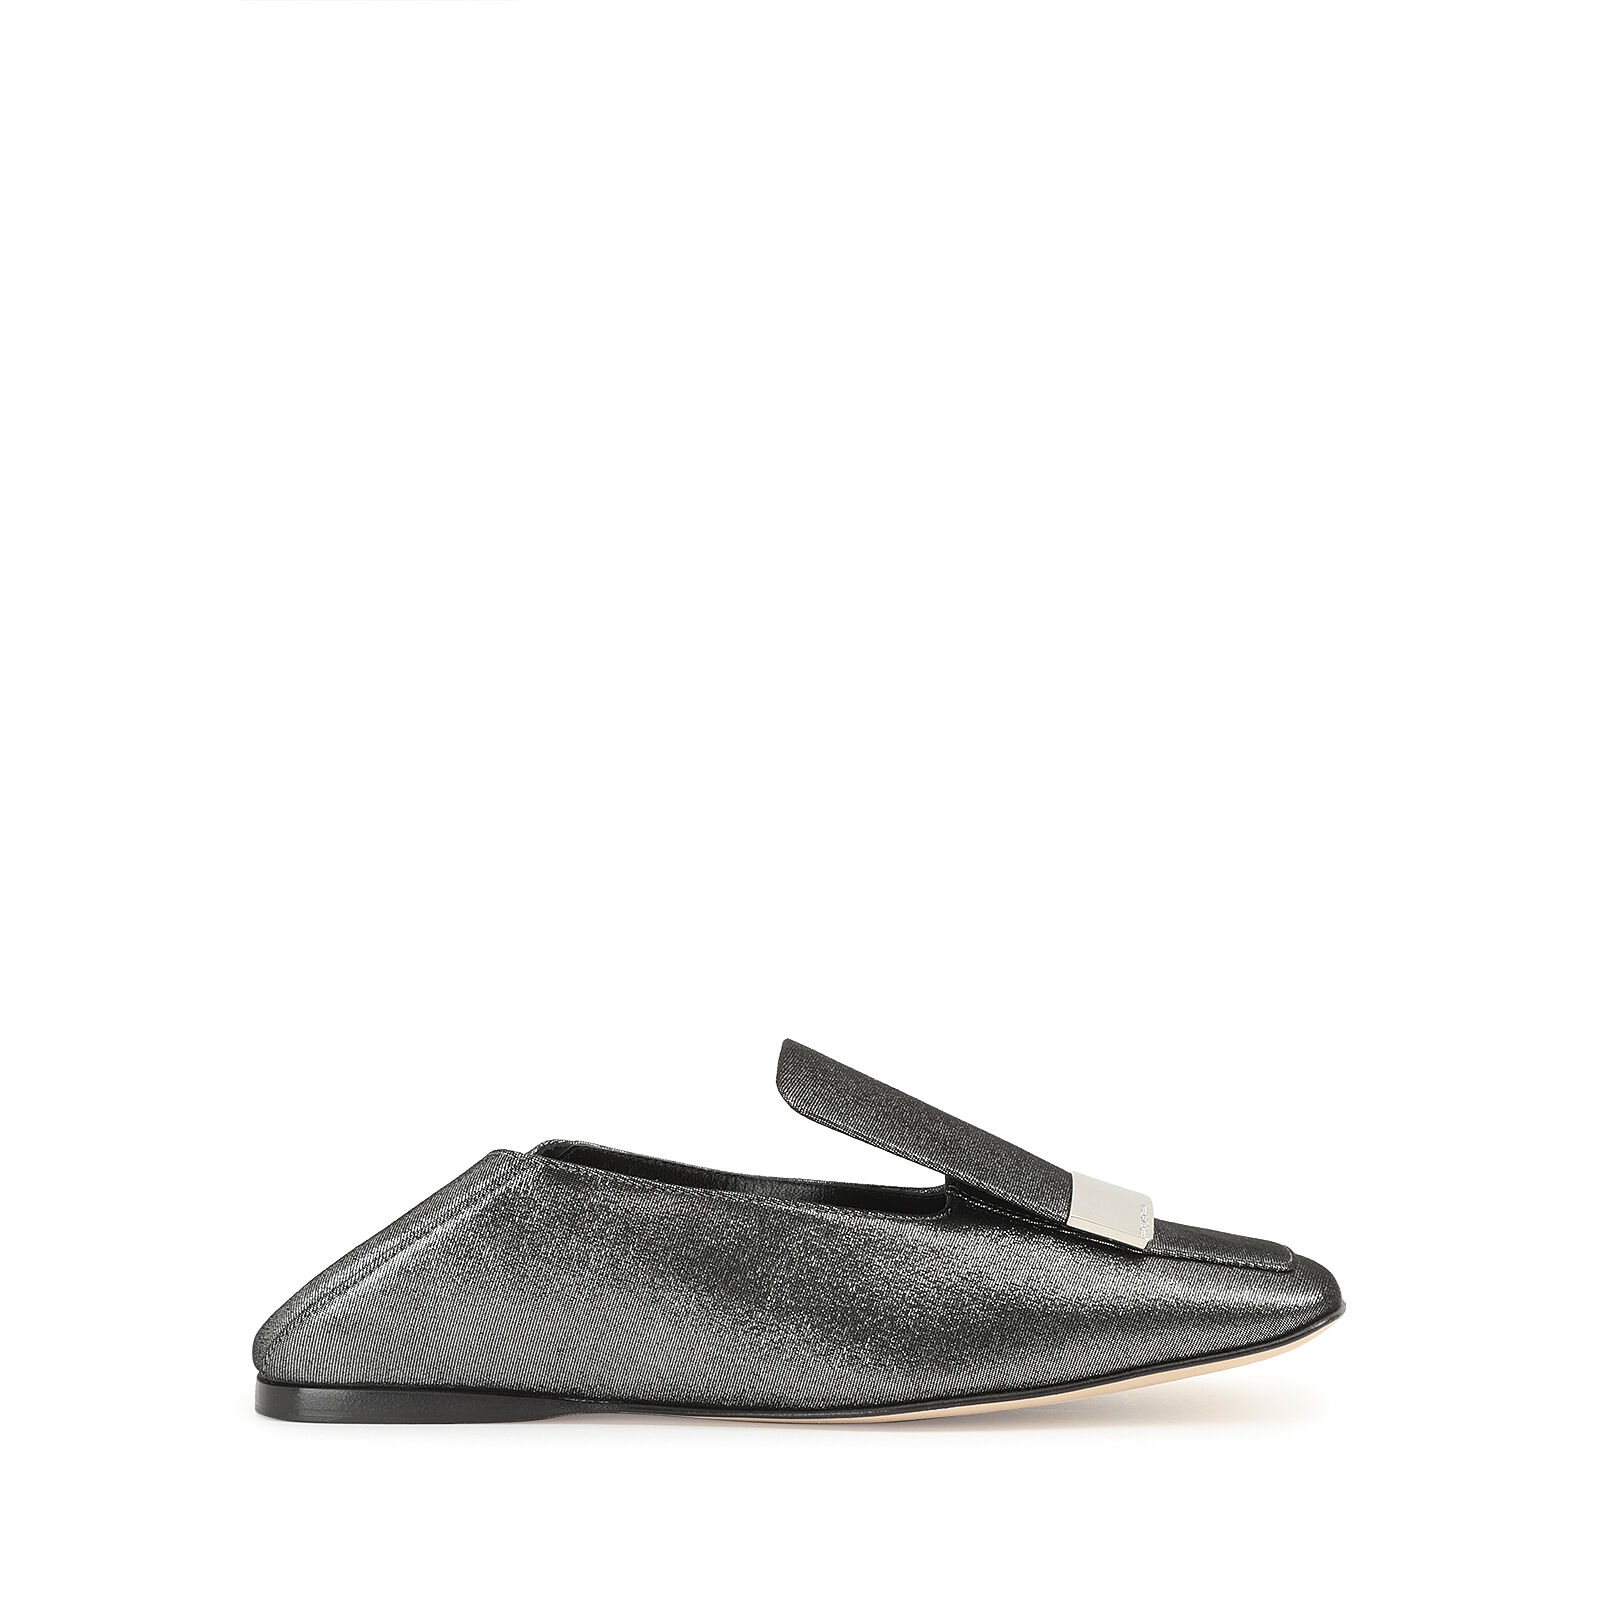 Womens Shoes Flats and flat shoes Ballet flats and ballerina shoes Sergio Rossi Slipper-mule In Black Leather in Grey 